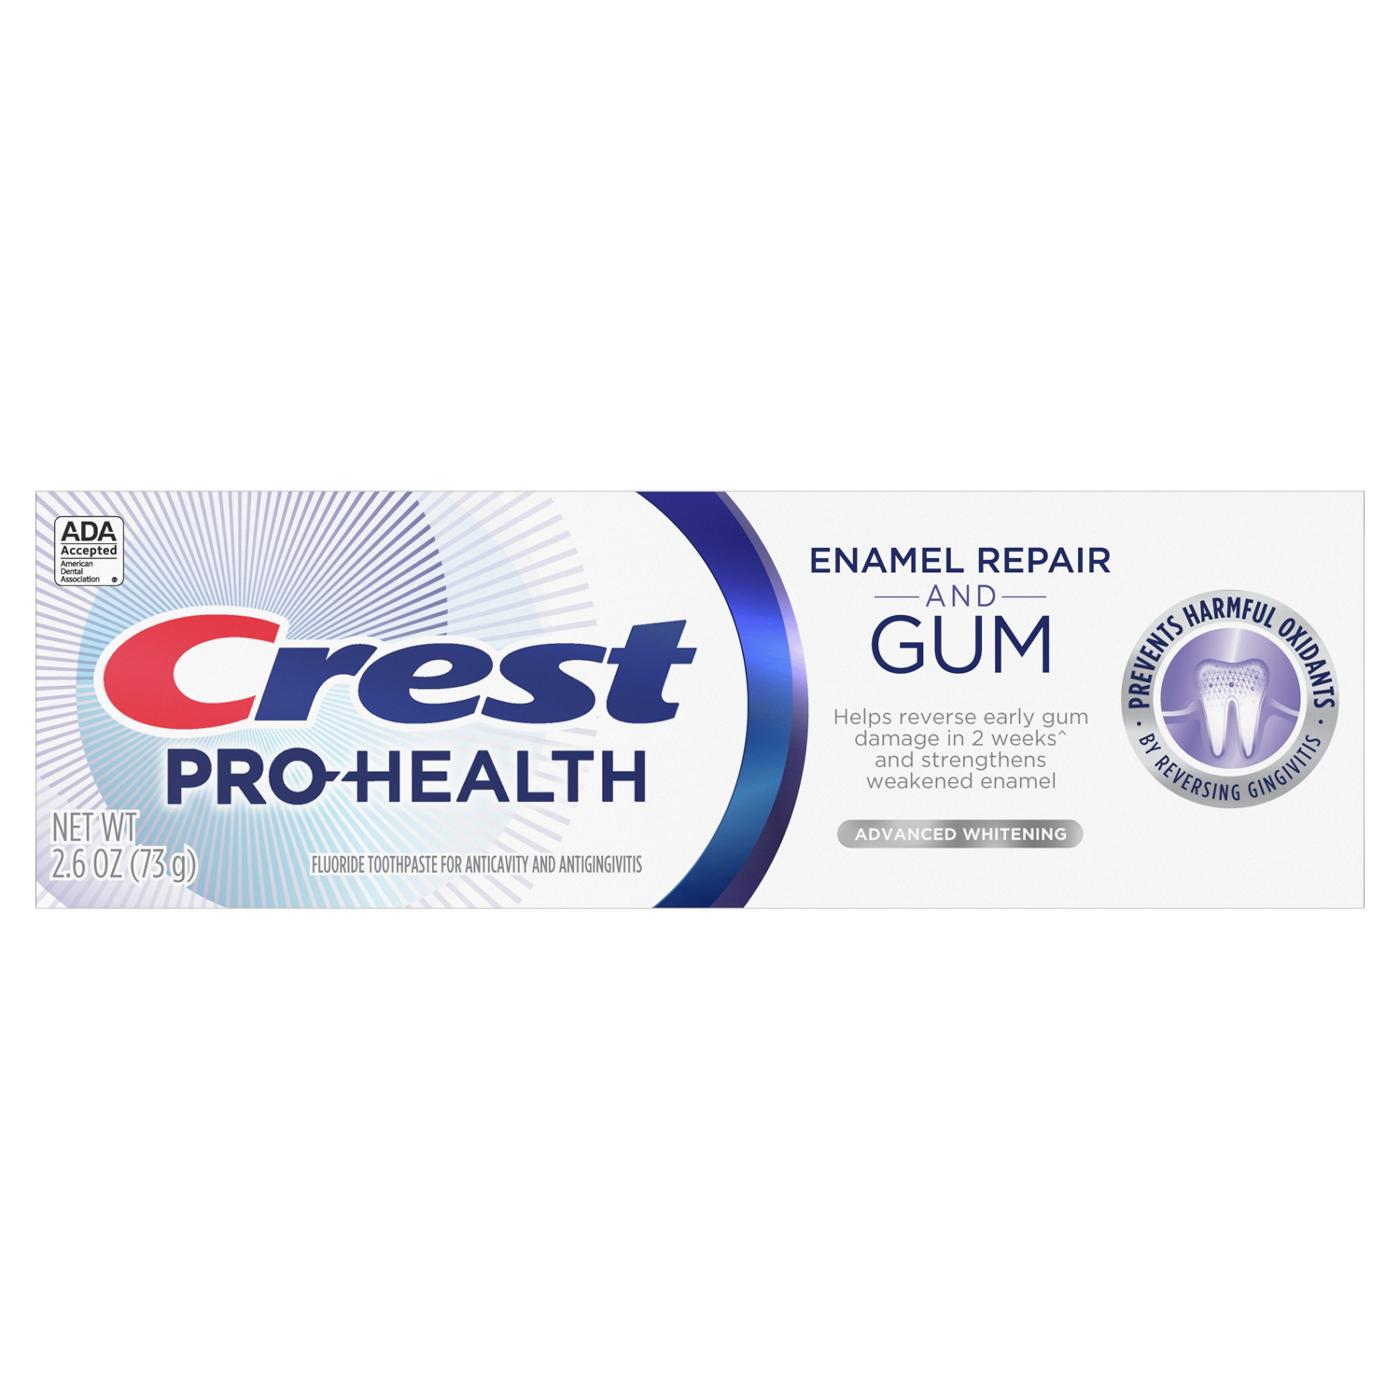 Crest Pro Health Enamel Repair and Gum Toothpaste - Advance Whitening; image 1 of 5